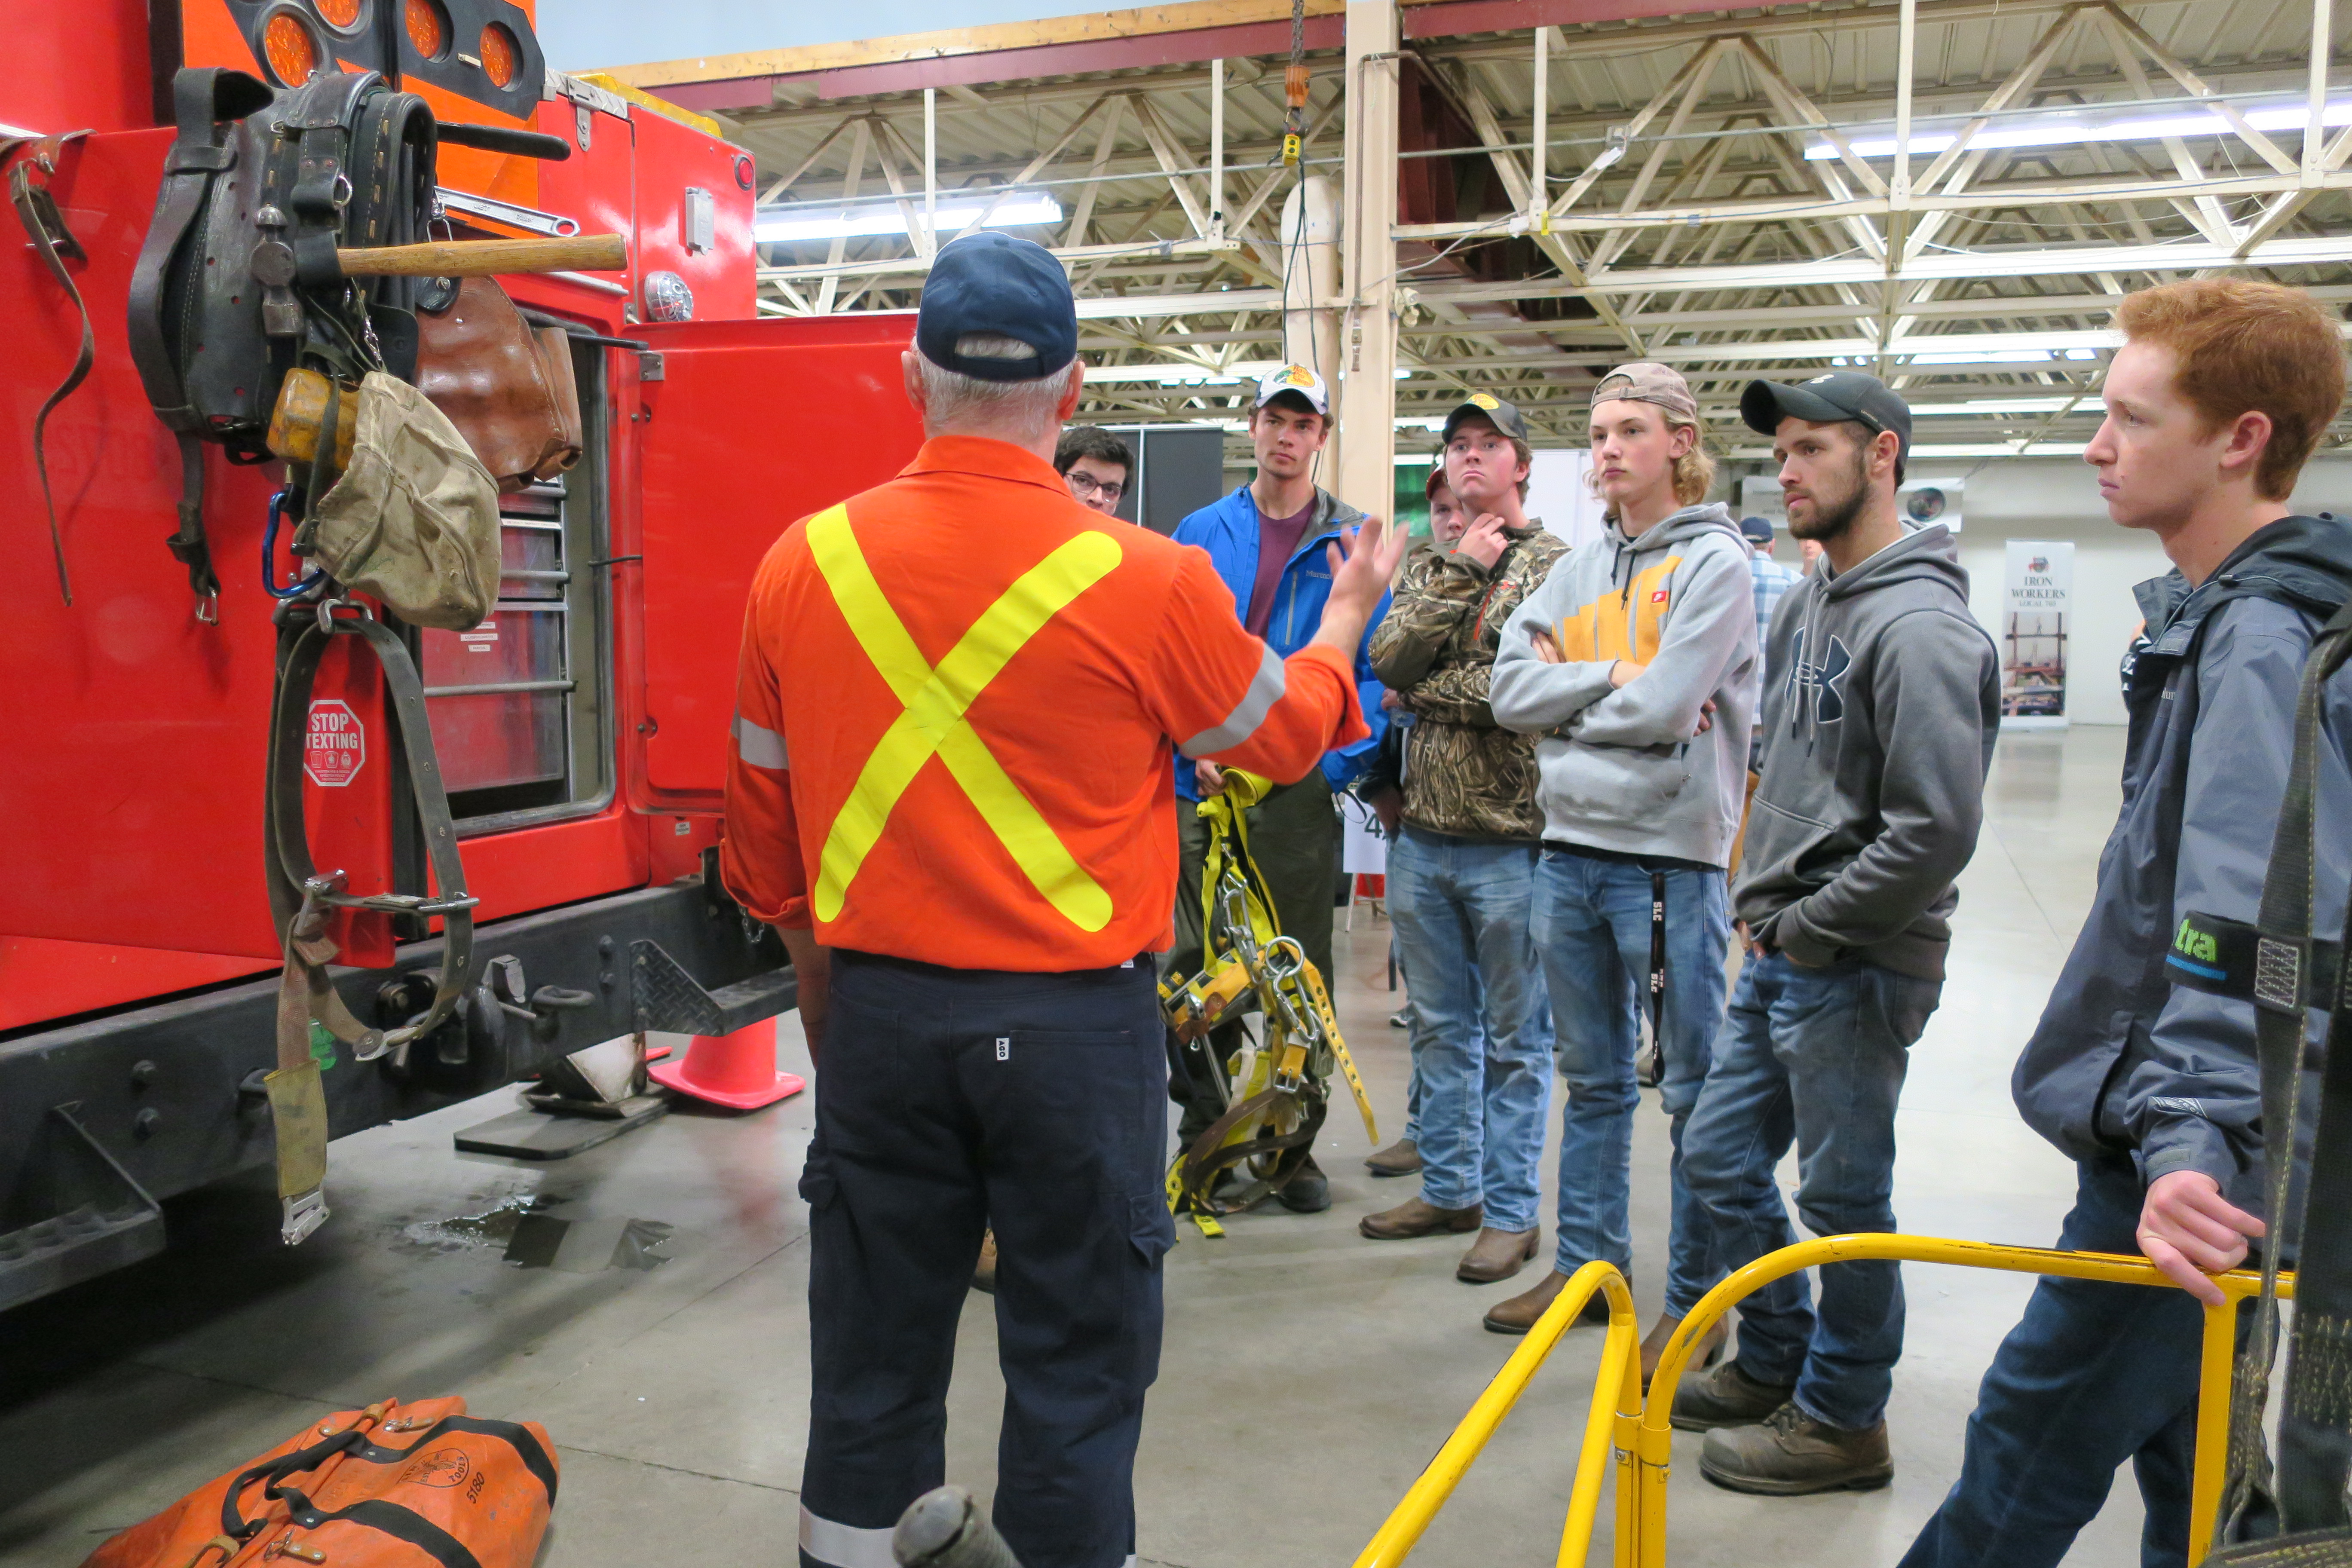 Employee speaking to Trades Day connects local grade 10 and 11 students at Trades Day